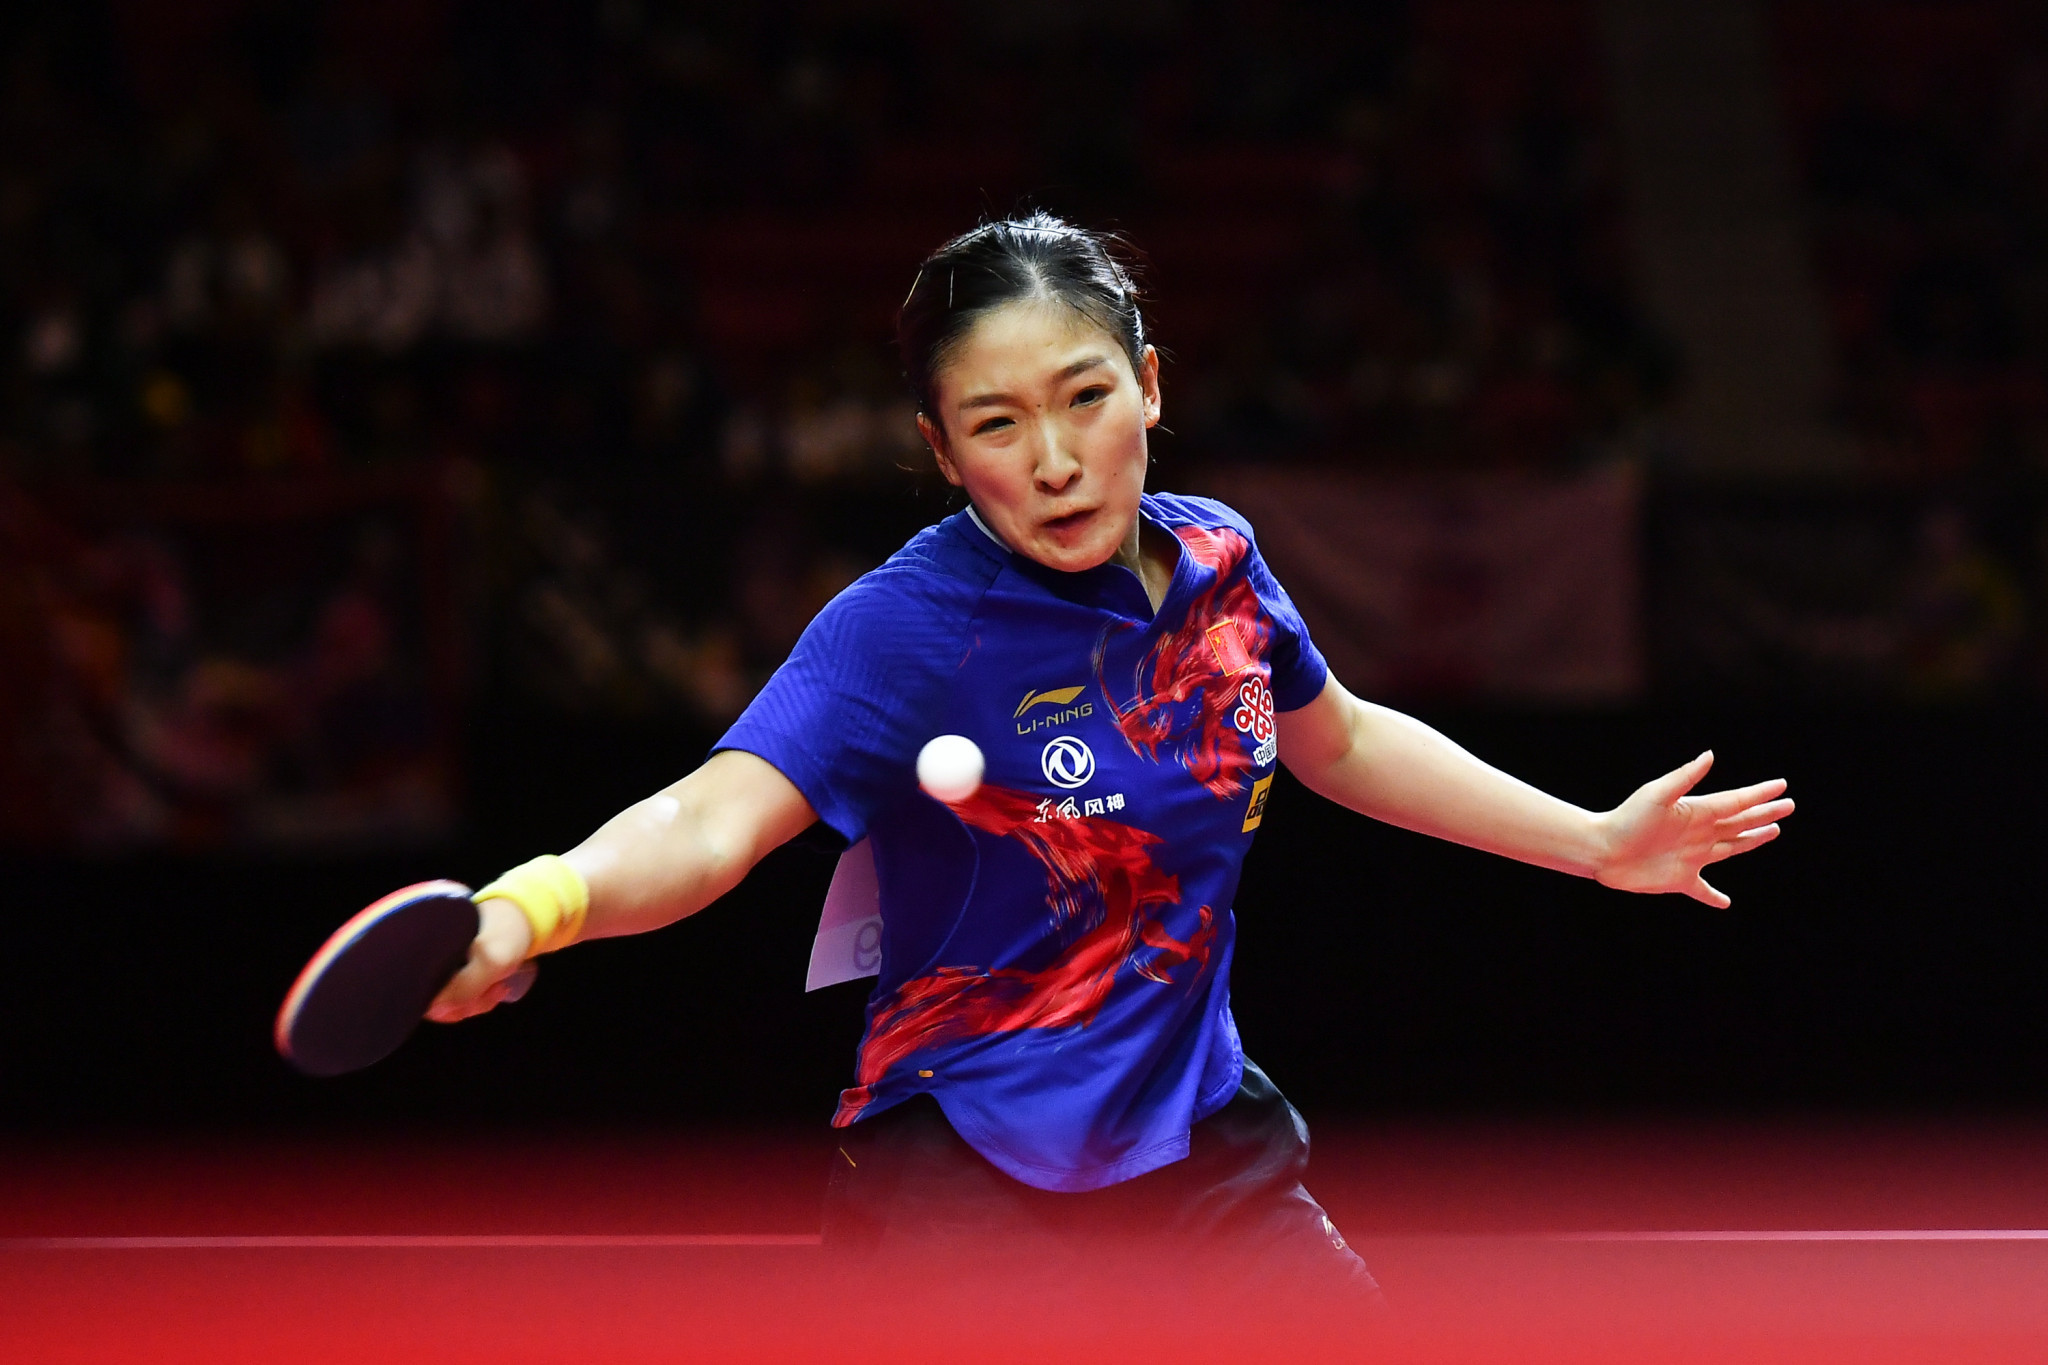 Liu Shiwen won the International Table Tennis Federation Women's World Cup event as the Executive Committee meeting took place in Chengdu ©Getty Images